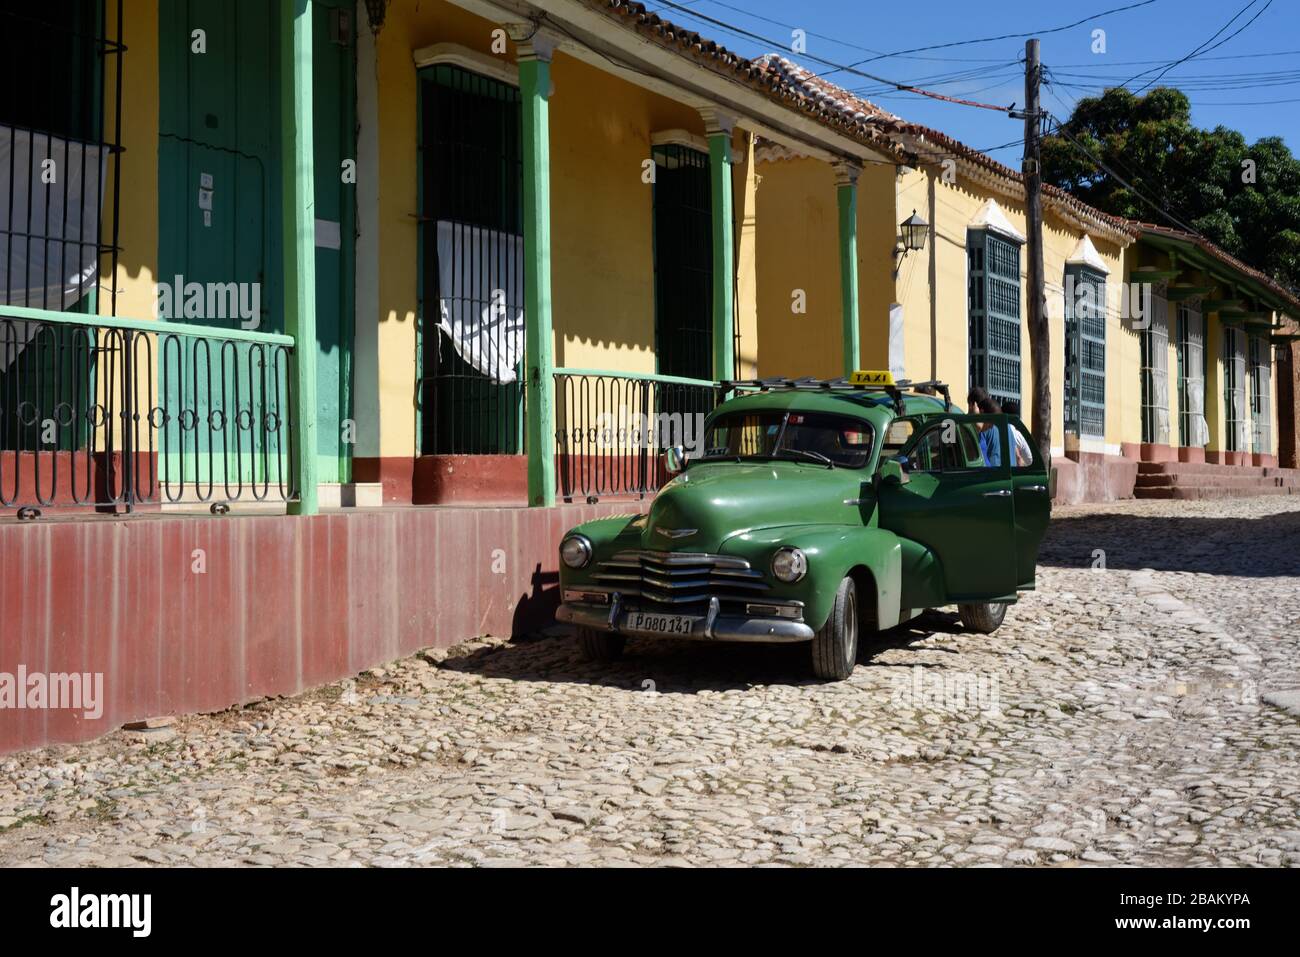 People, car, architecture, houses, 2014, Cuba Stock Photo